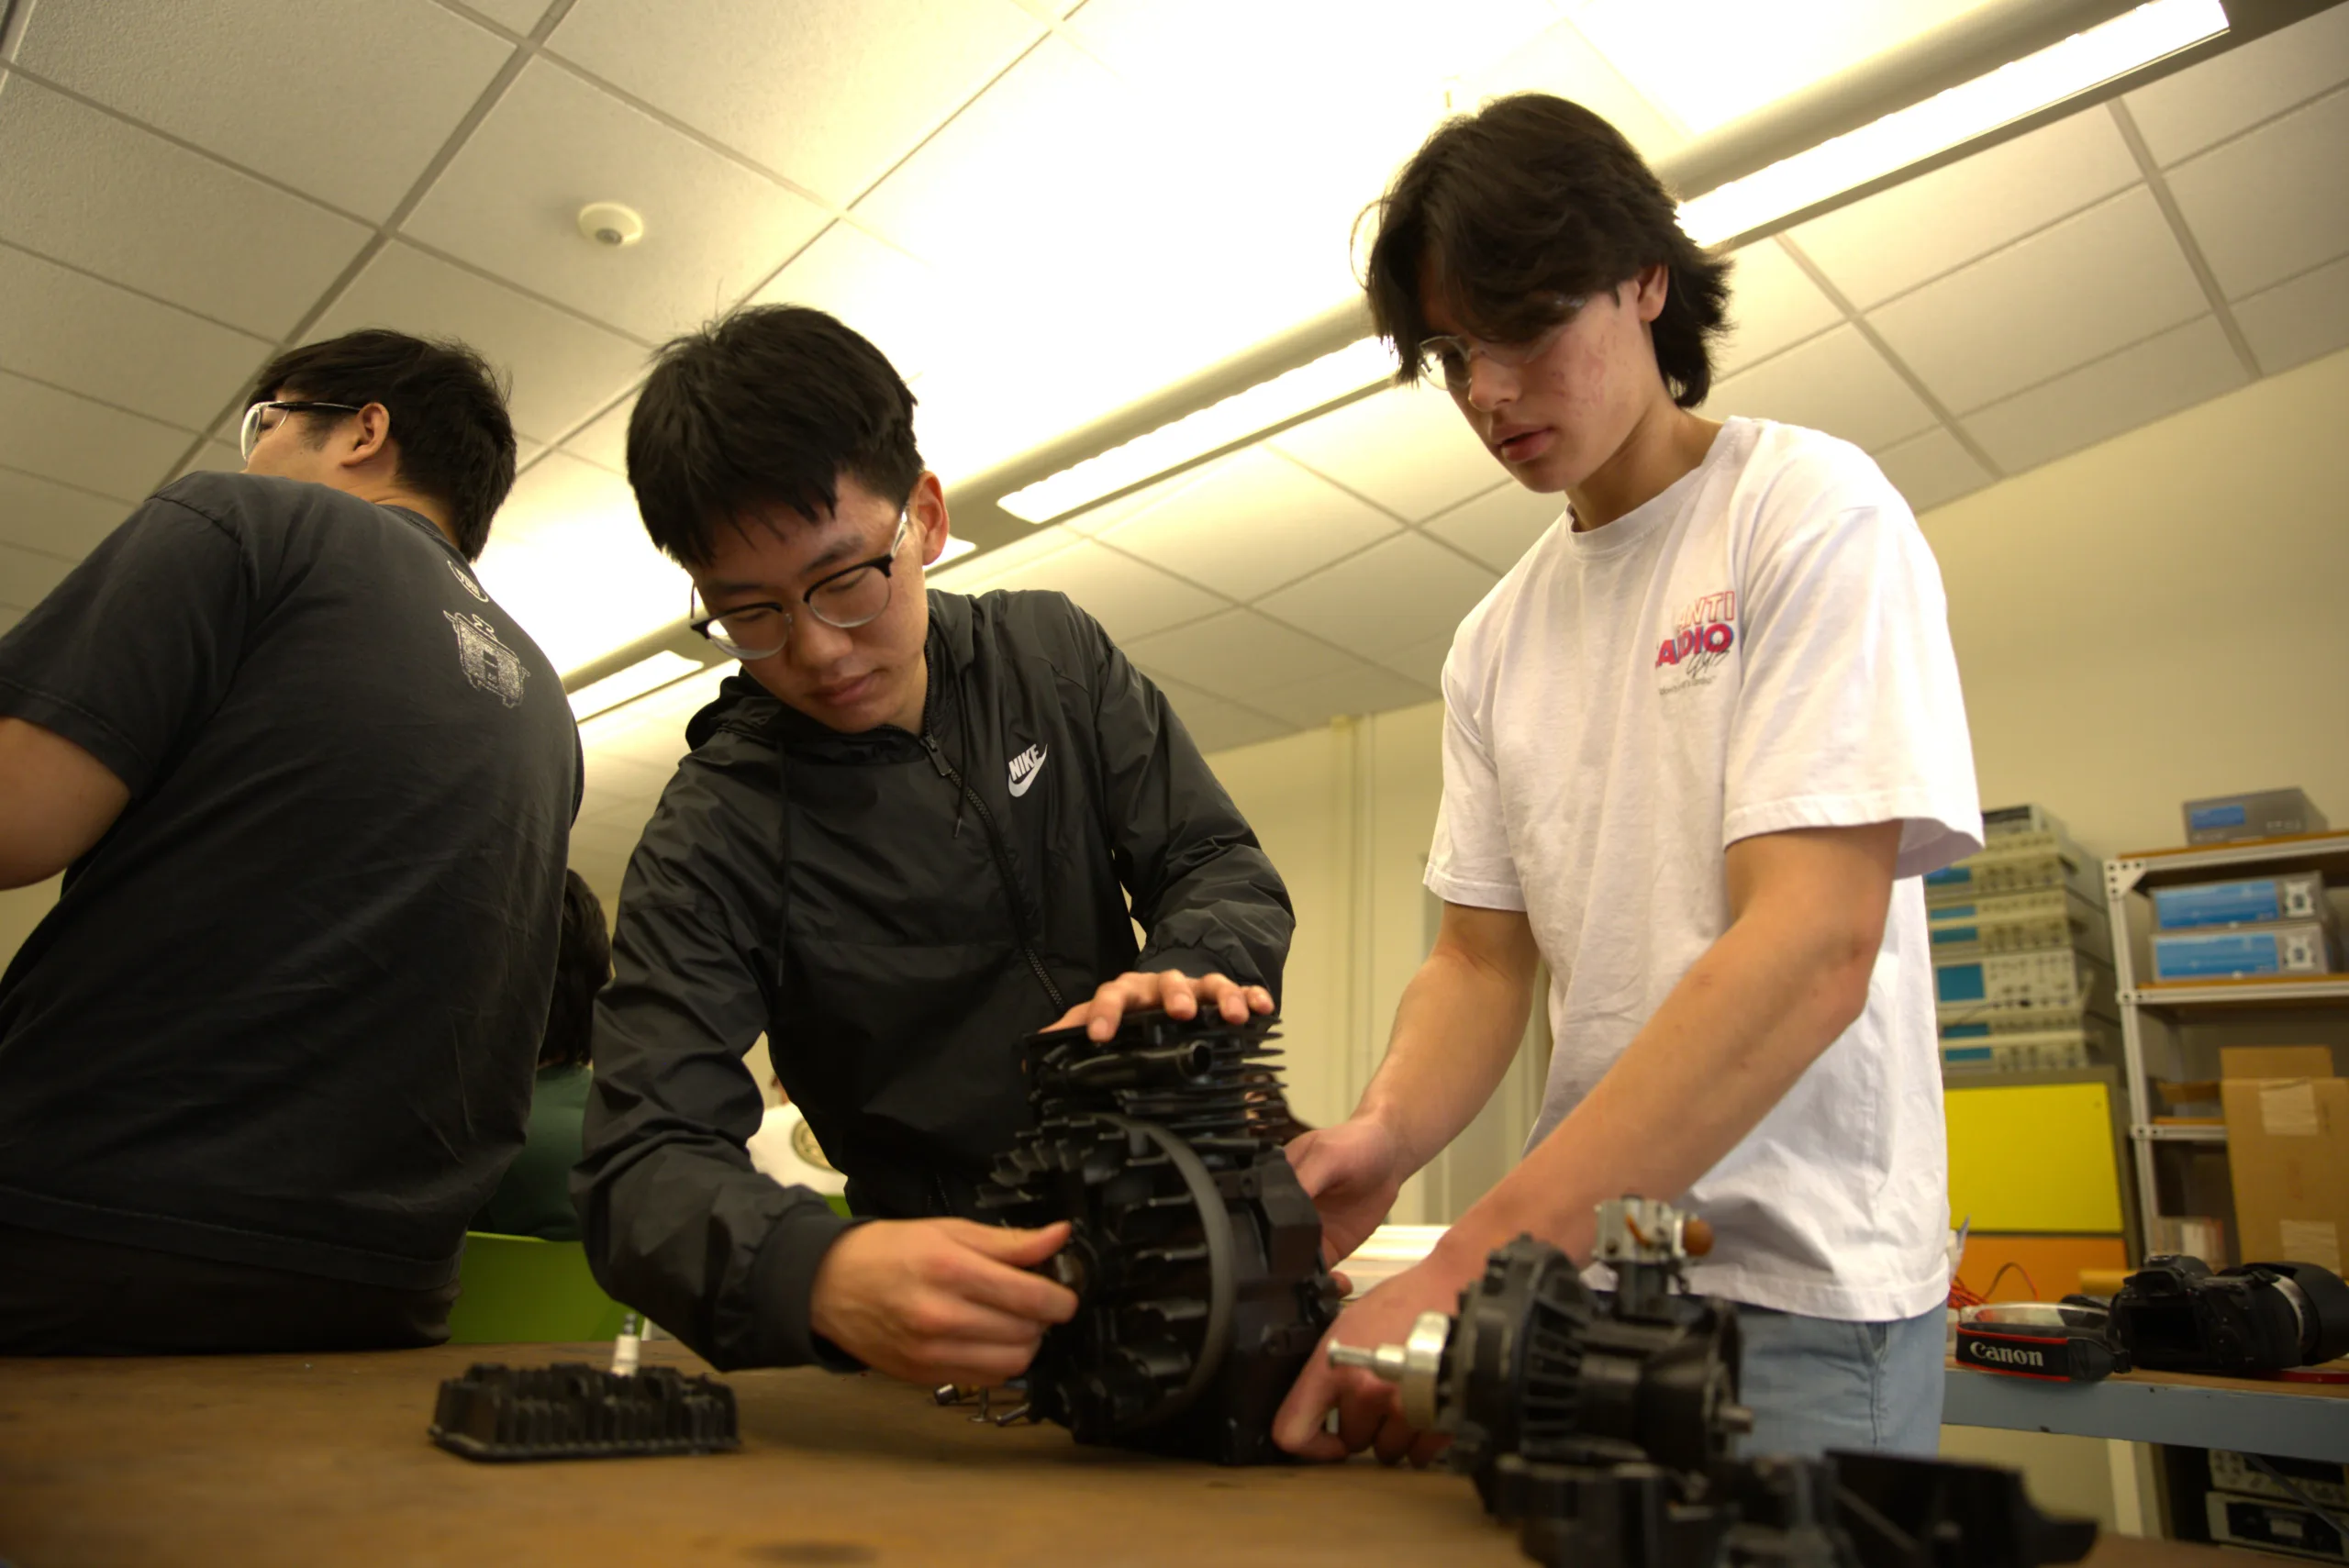 Students work on a small engine in a college lab